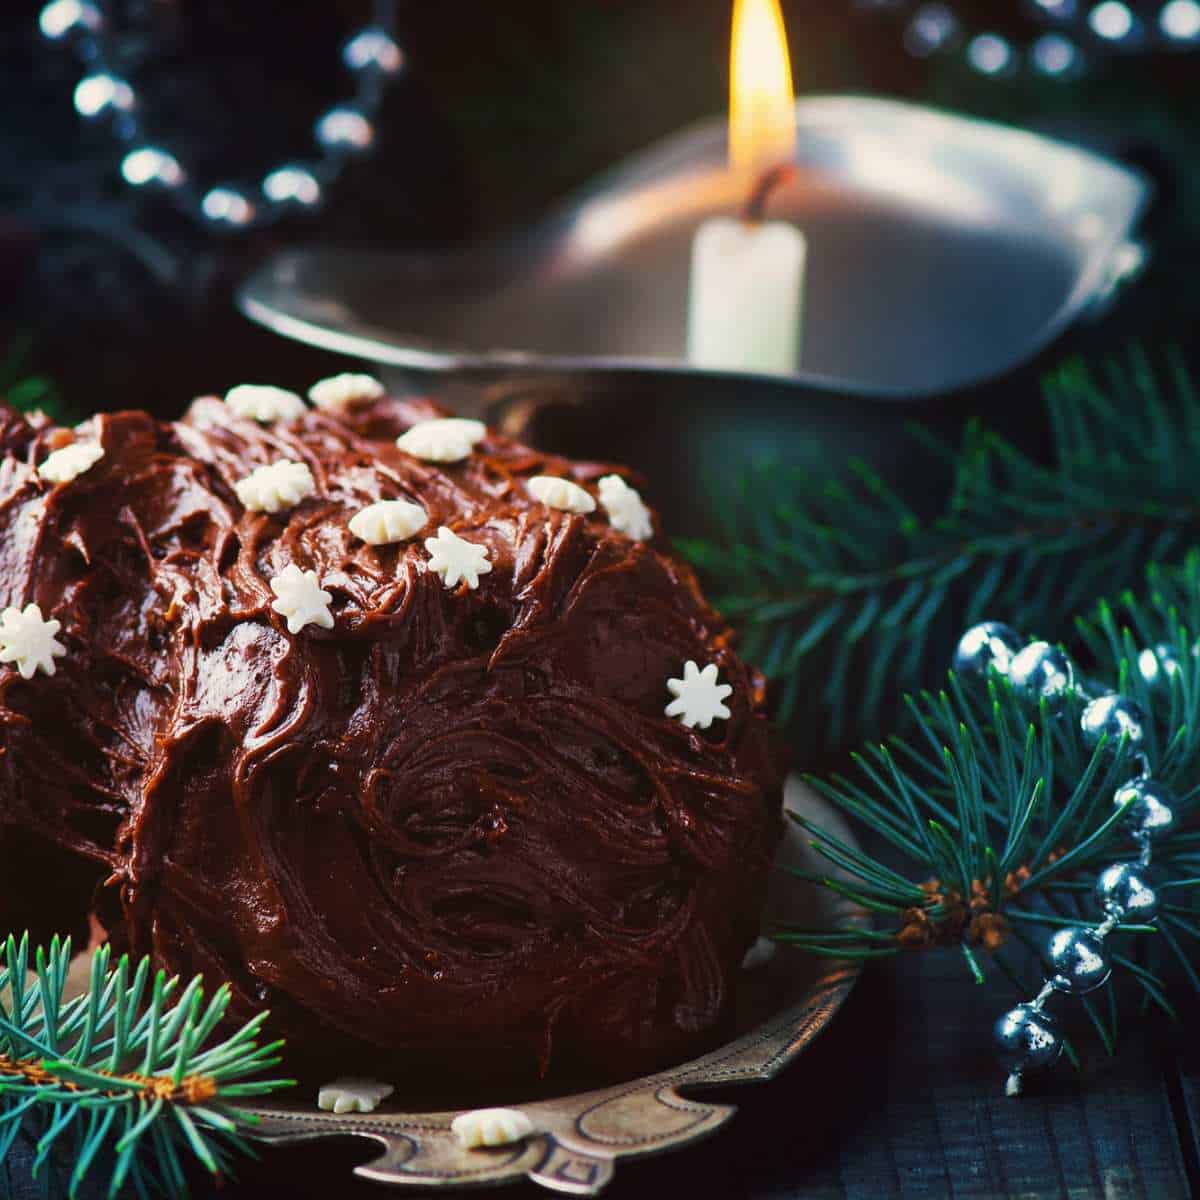 A chocolate cake is sitting on a plate next to a yule candle.